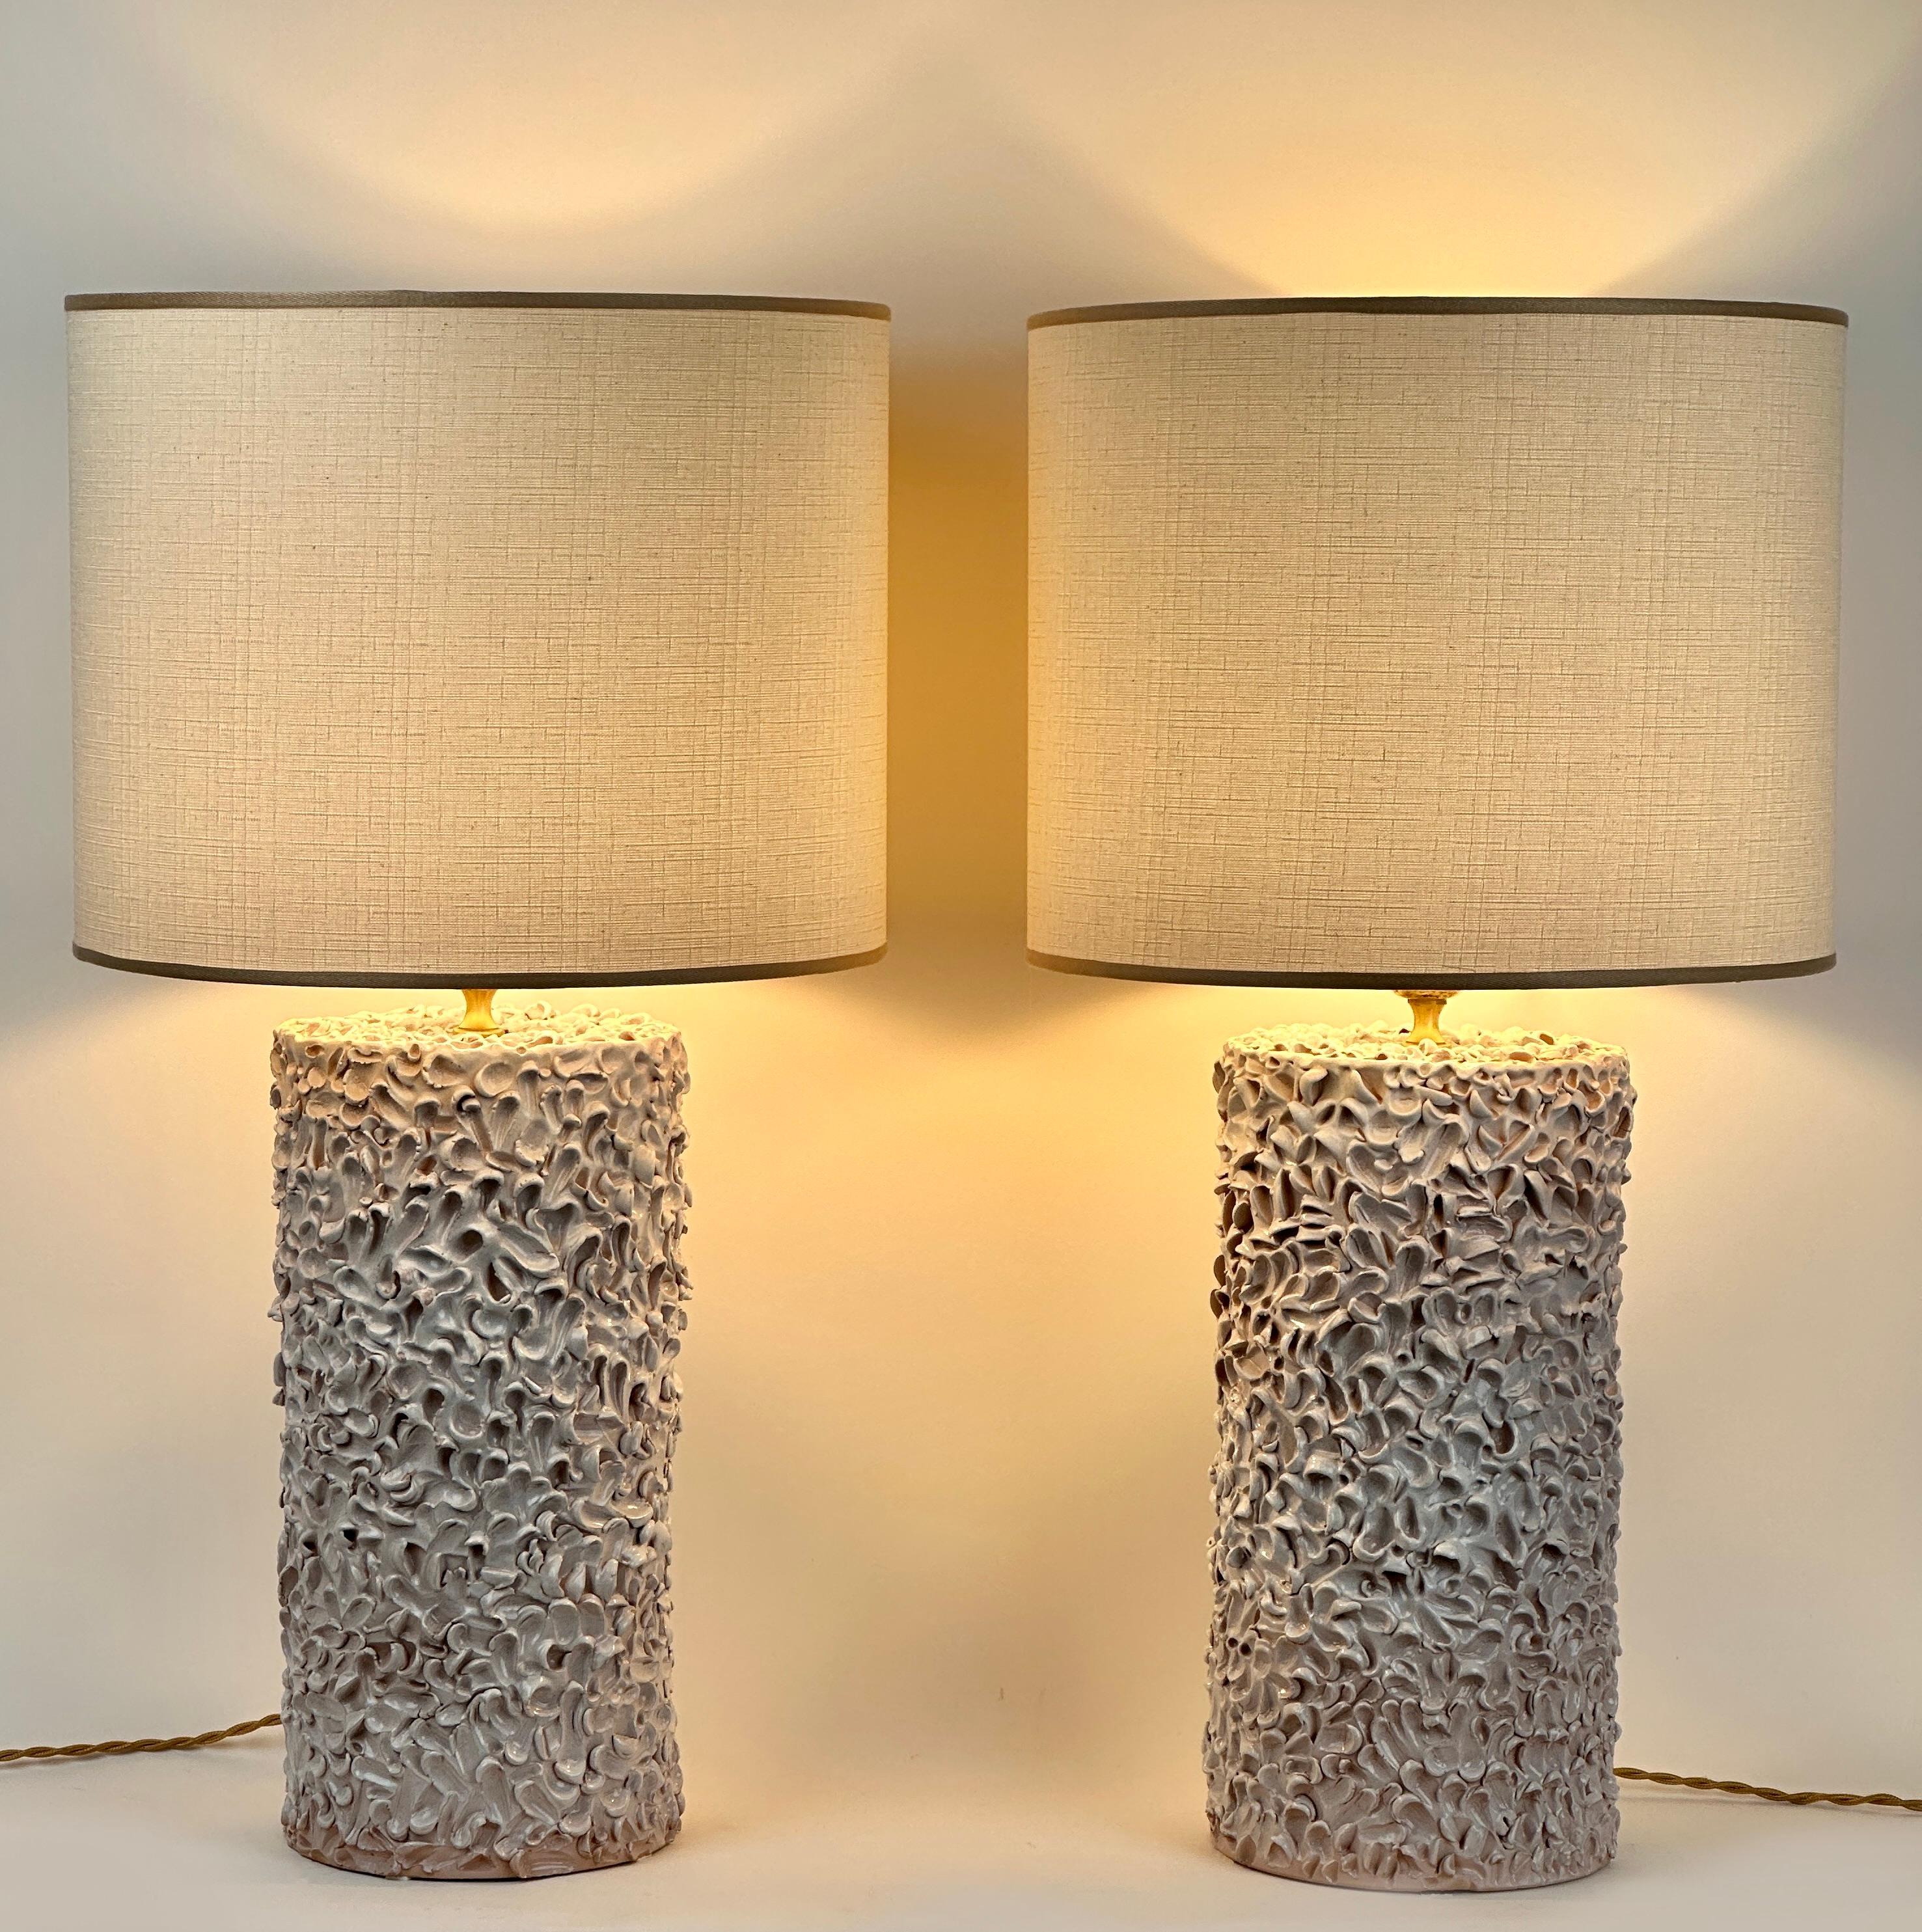 Interesting handmade textured pattern visible on the round ceramic bodies of the table lamps coming from the small town of Albisola Marina (Italian Riviera).
The white cotton shades size is: 40 Diam. x 32 H cm. each
The total lamp height with the